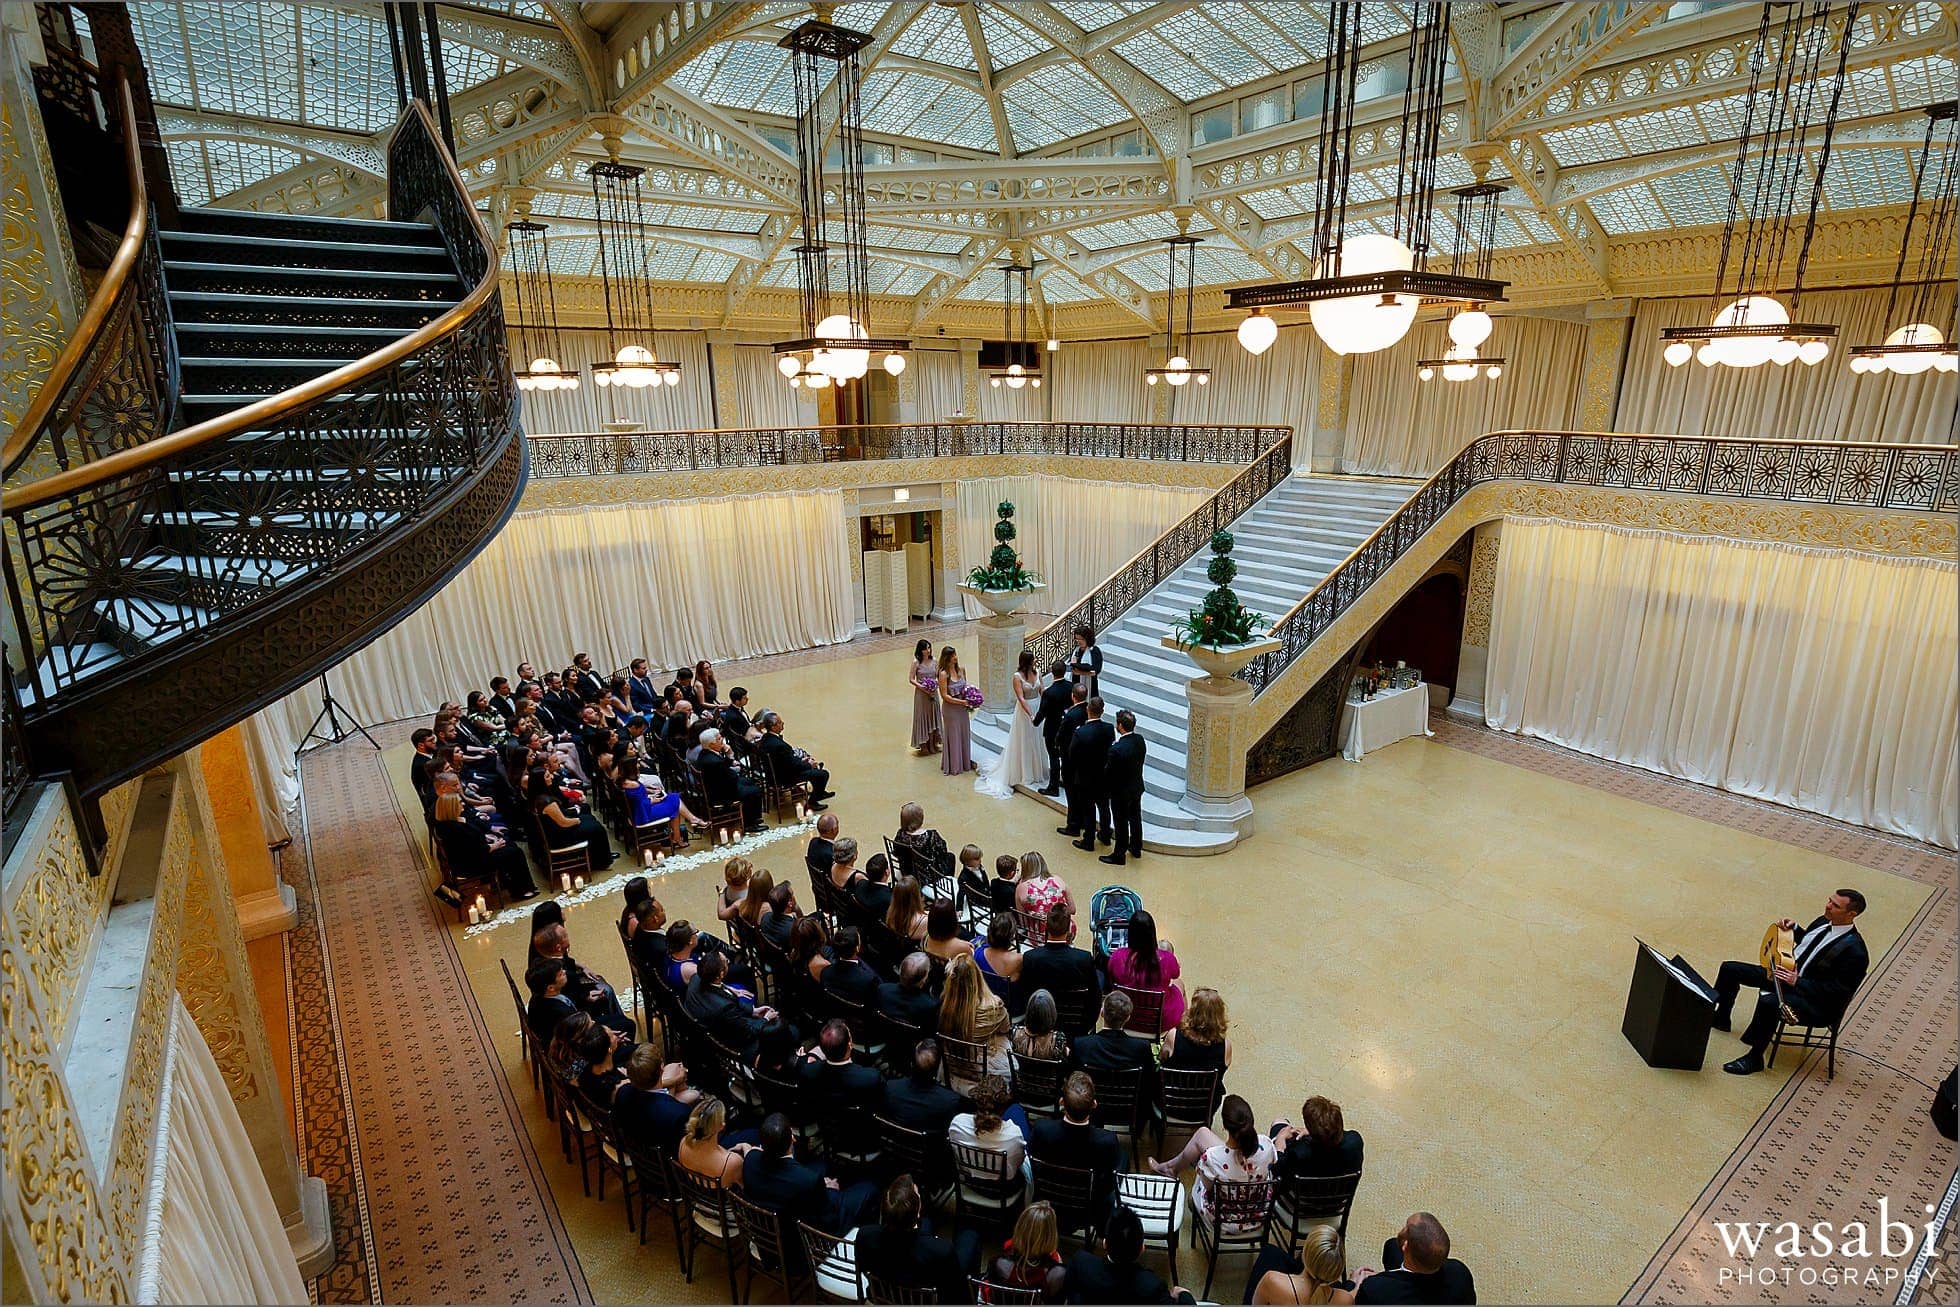 The Rookery Building wedding photos wide angle full room view of wedding ceremony at The Rookery Building in Chicago with stairs in the forground and steps in the background